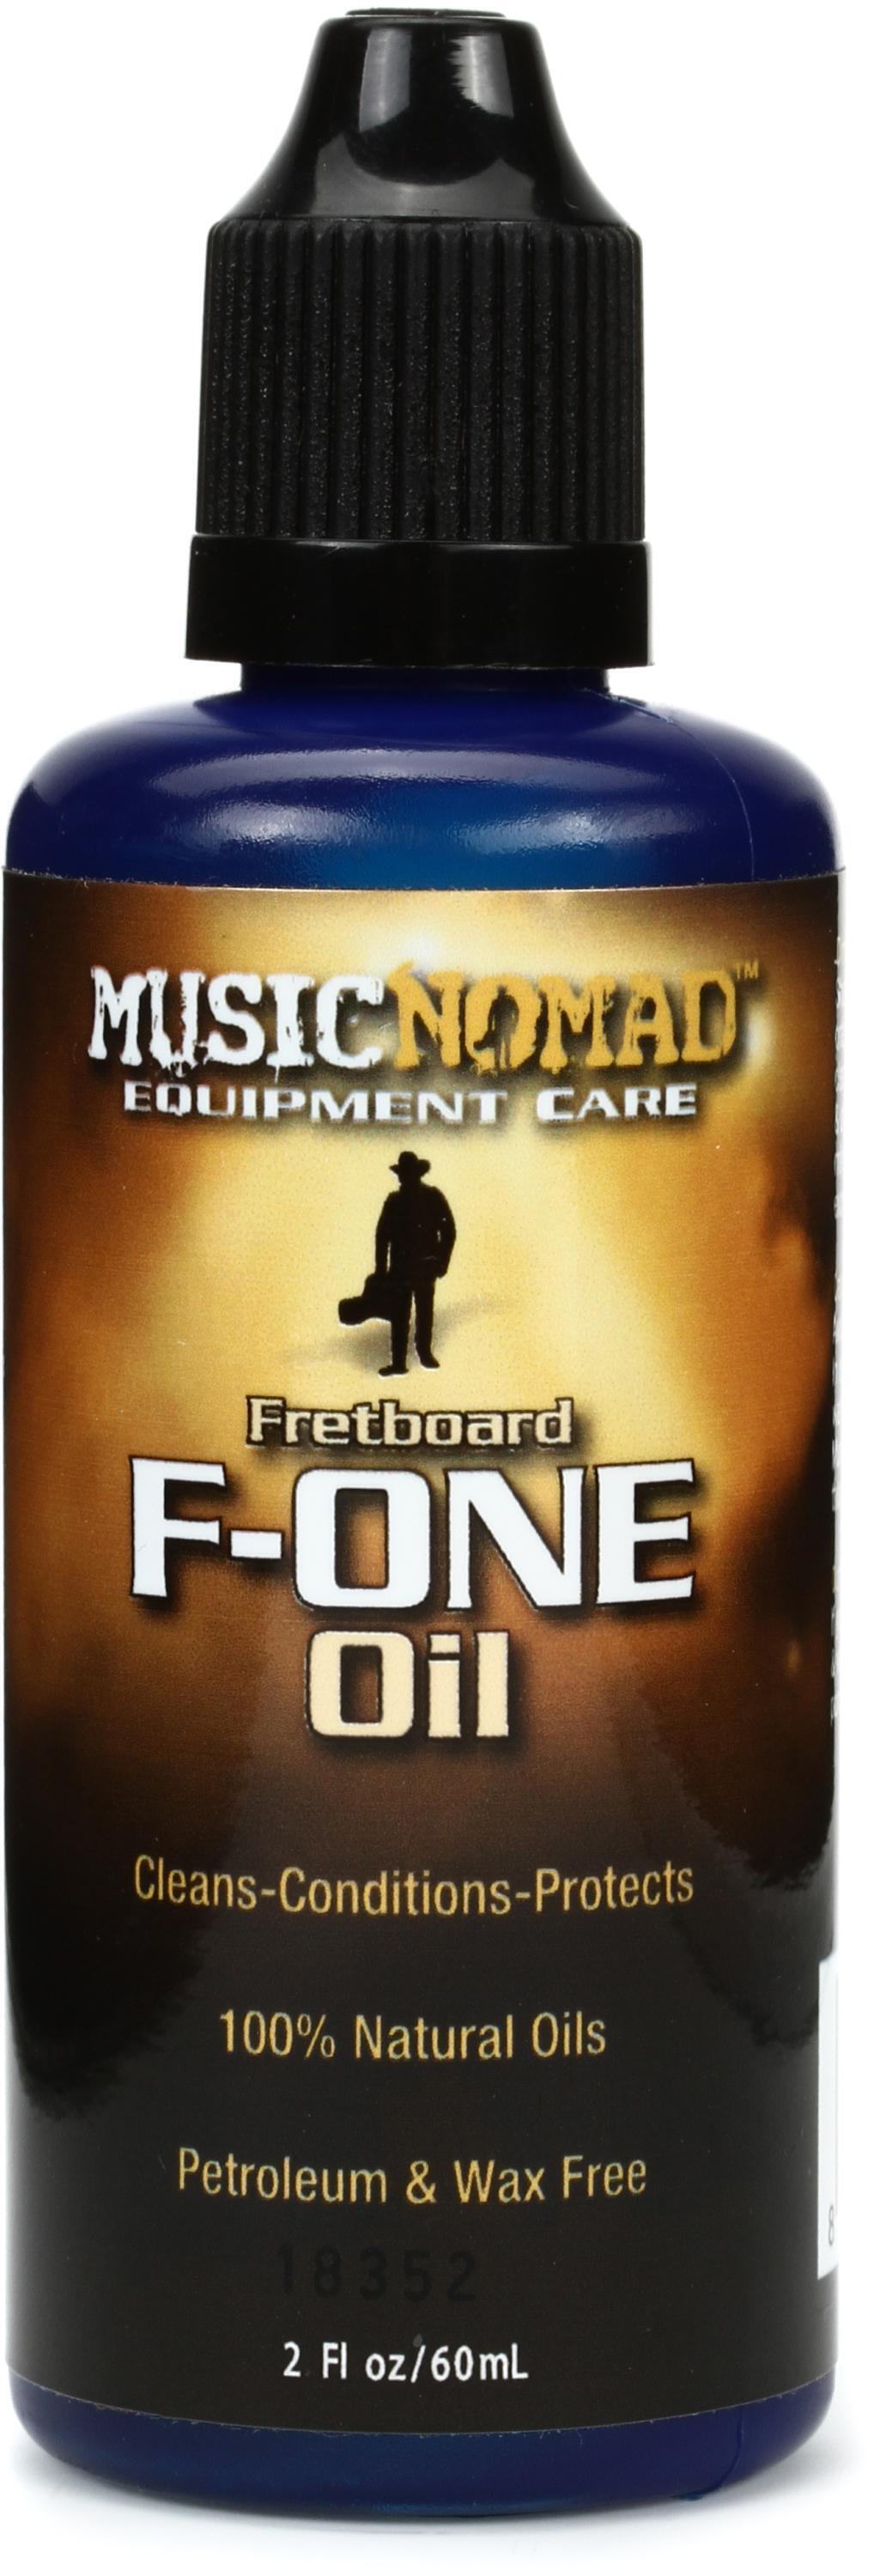  Guitar Cleaning, Polish and Oil Care Kit - Guitar Oil and  Cleaner for Body and Fretboard Fingerboard - Cleans, Polishes, and Protects  : Musical Instruments